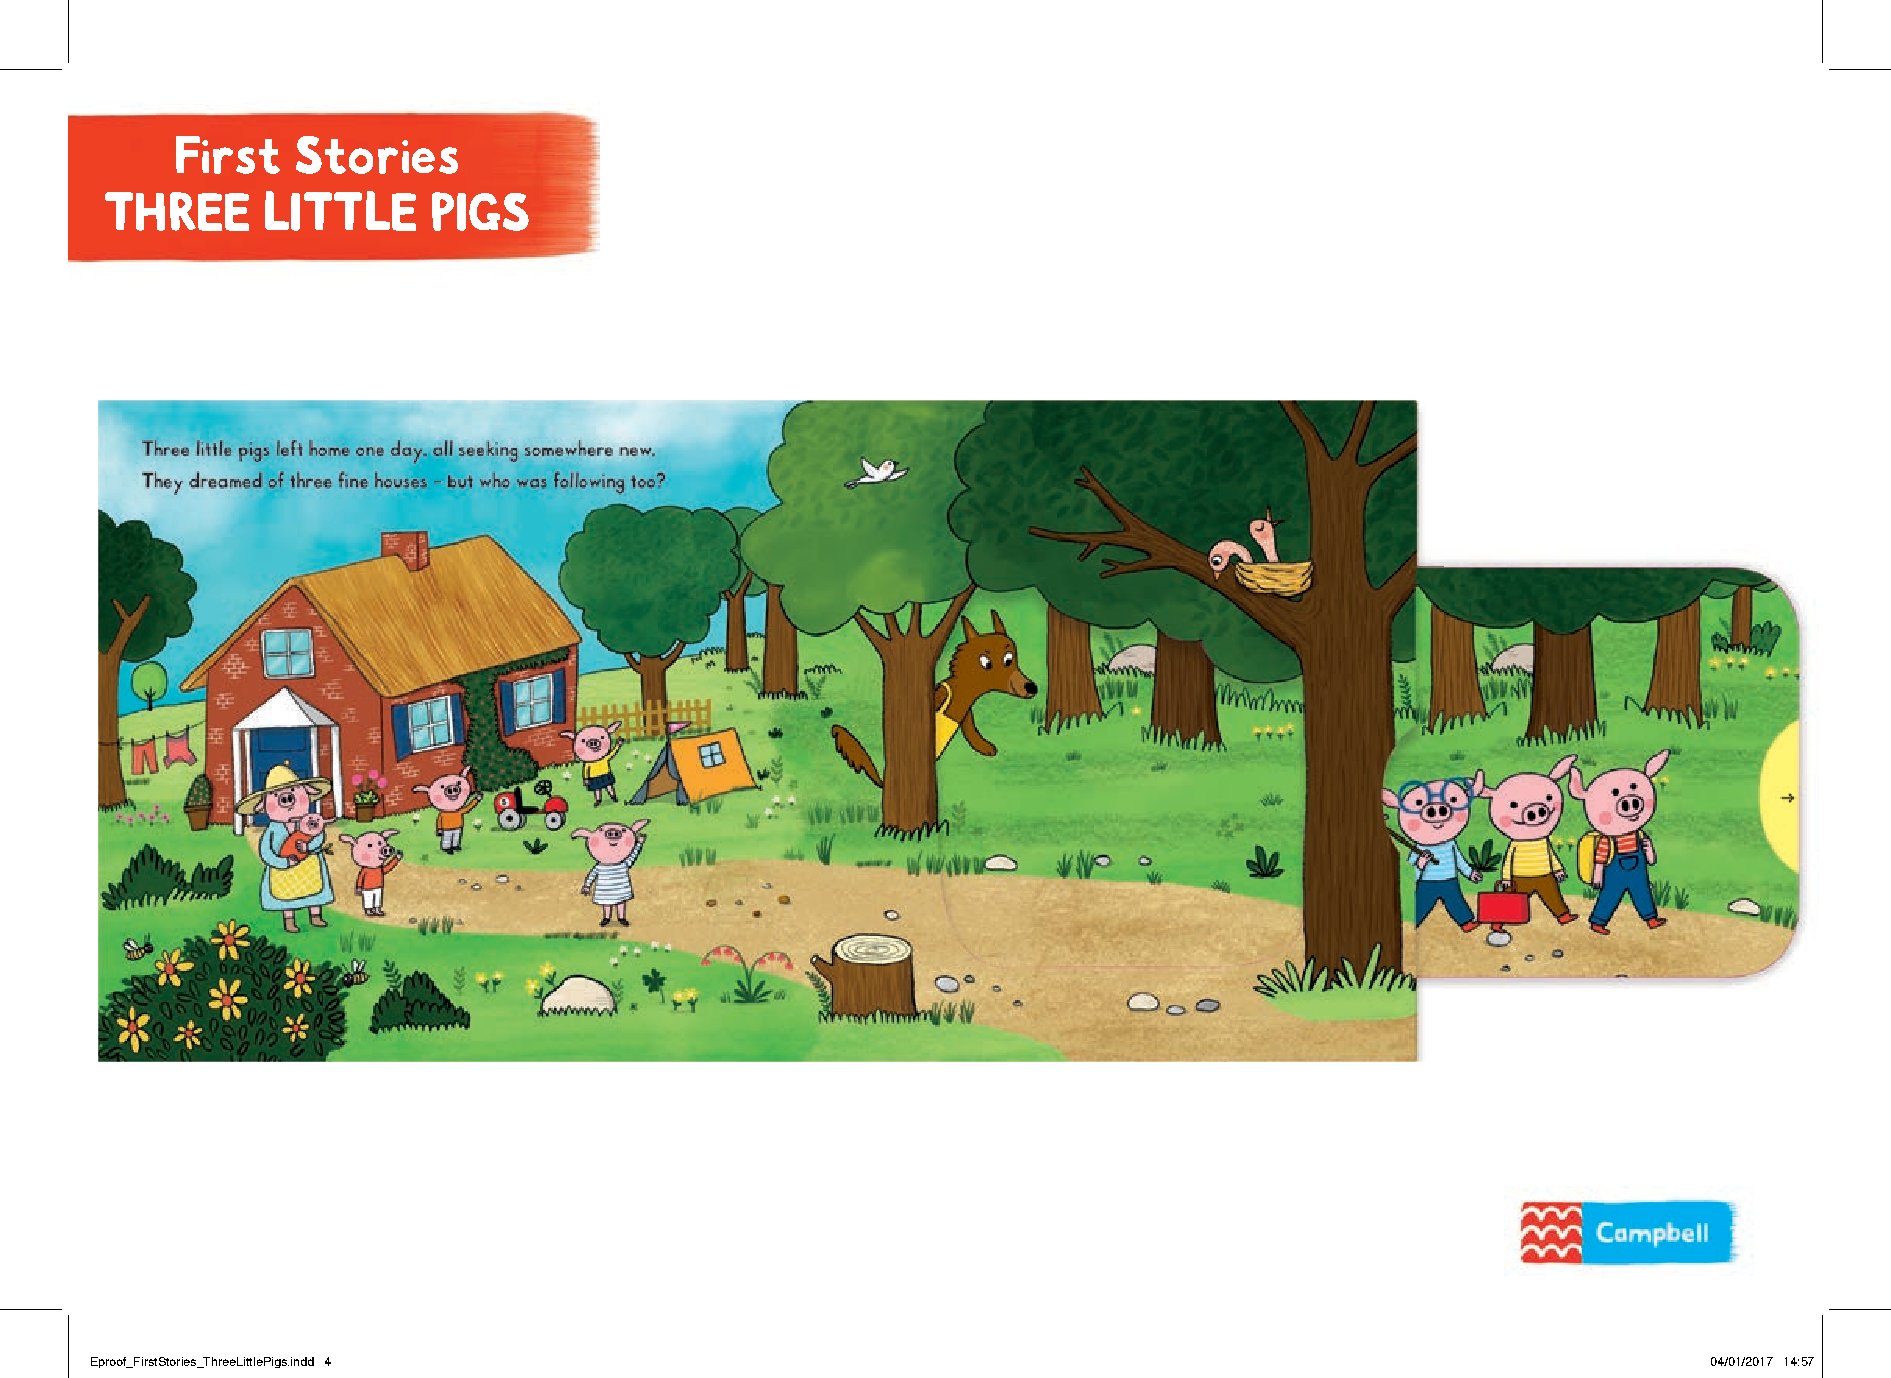 First Stories: The Three Little Pigs